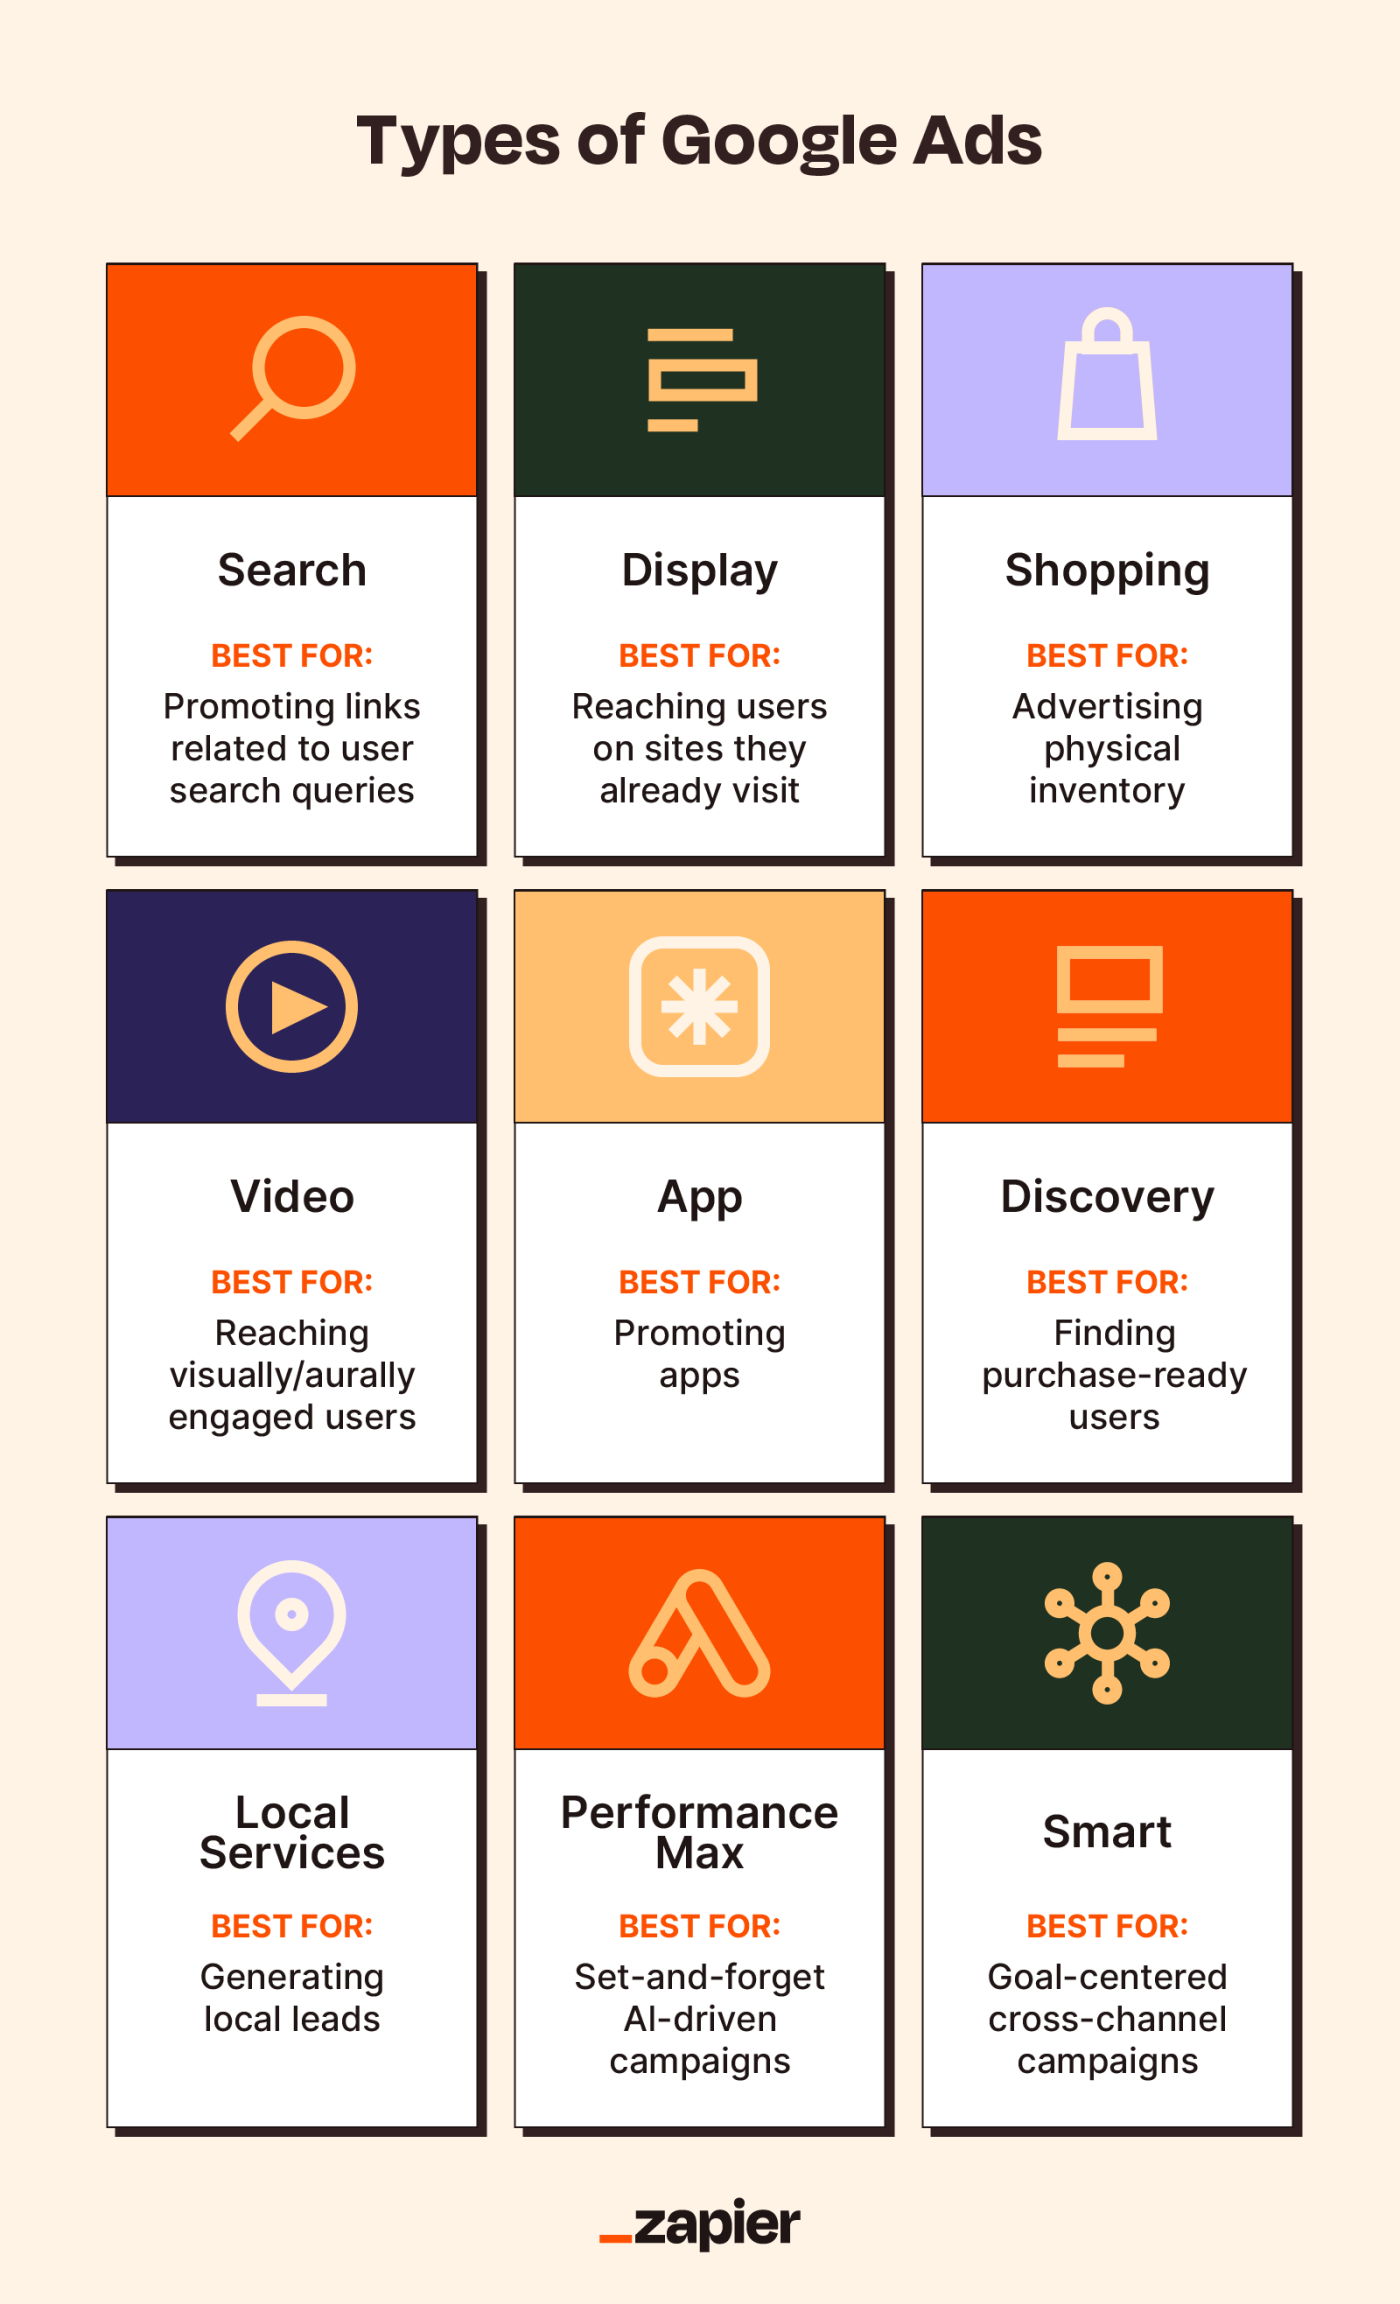 Graphic titled Types of Google Ads listing Search, Display, Shopping, Video, App, Discovery, Local Services, Performance Max, and Smart.